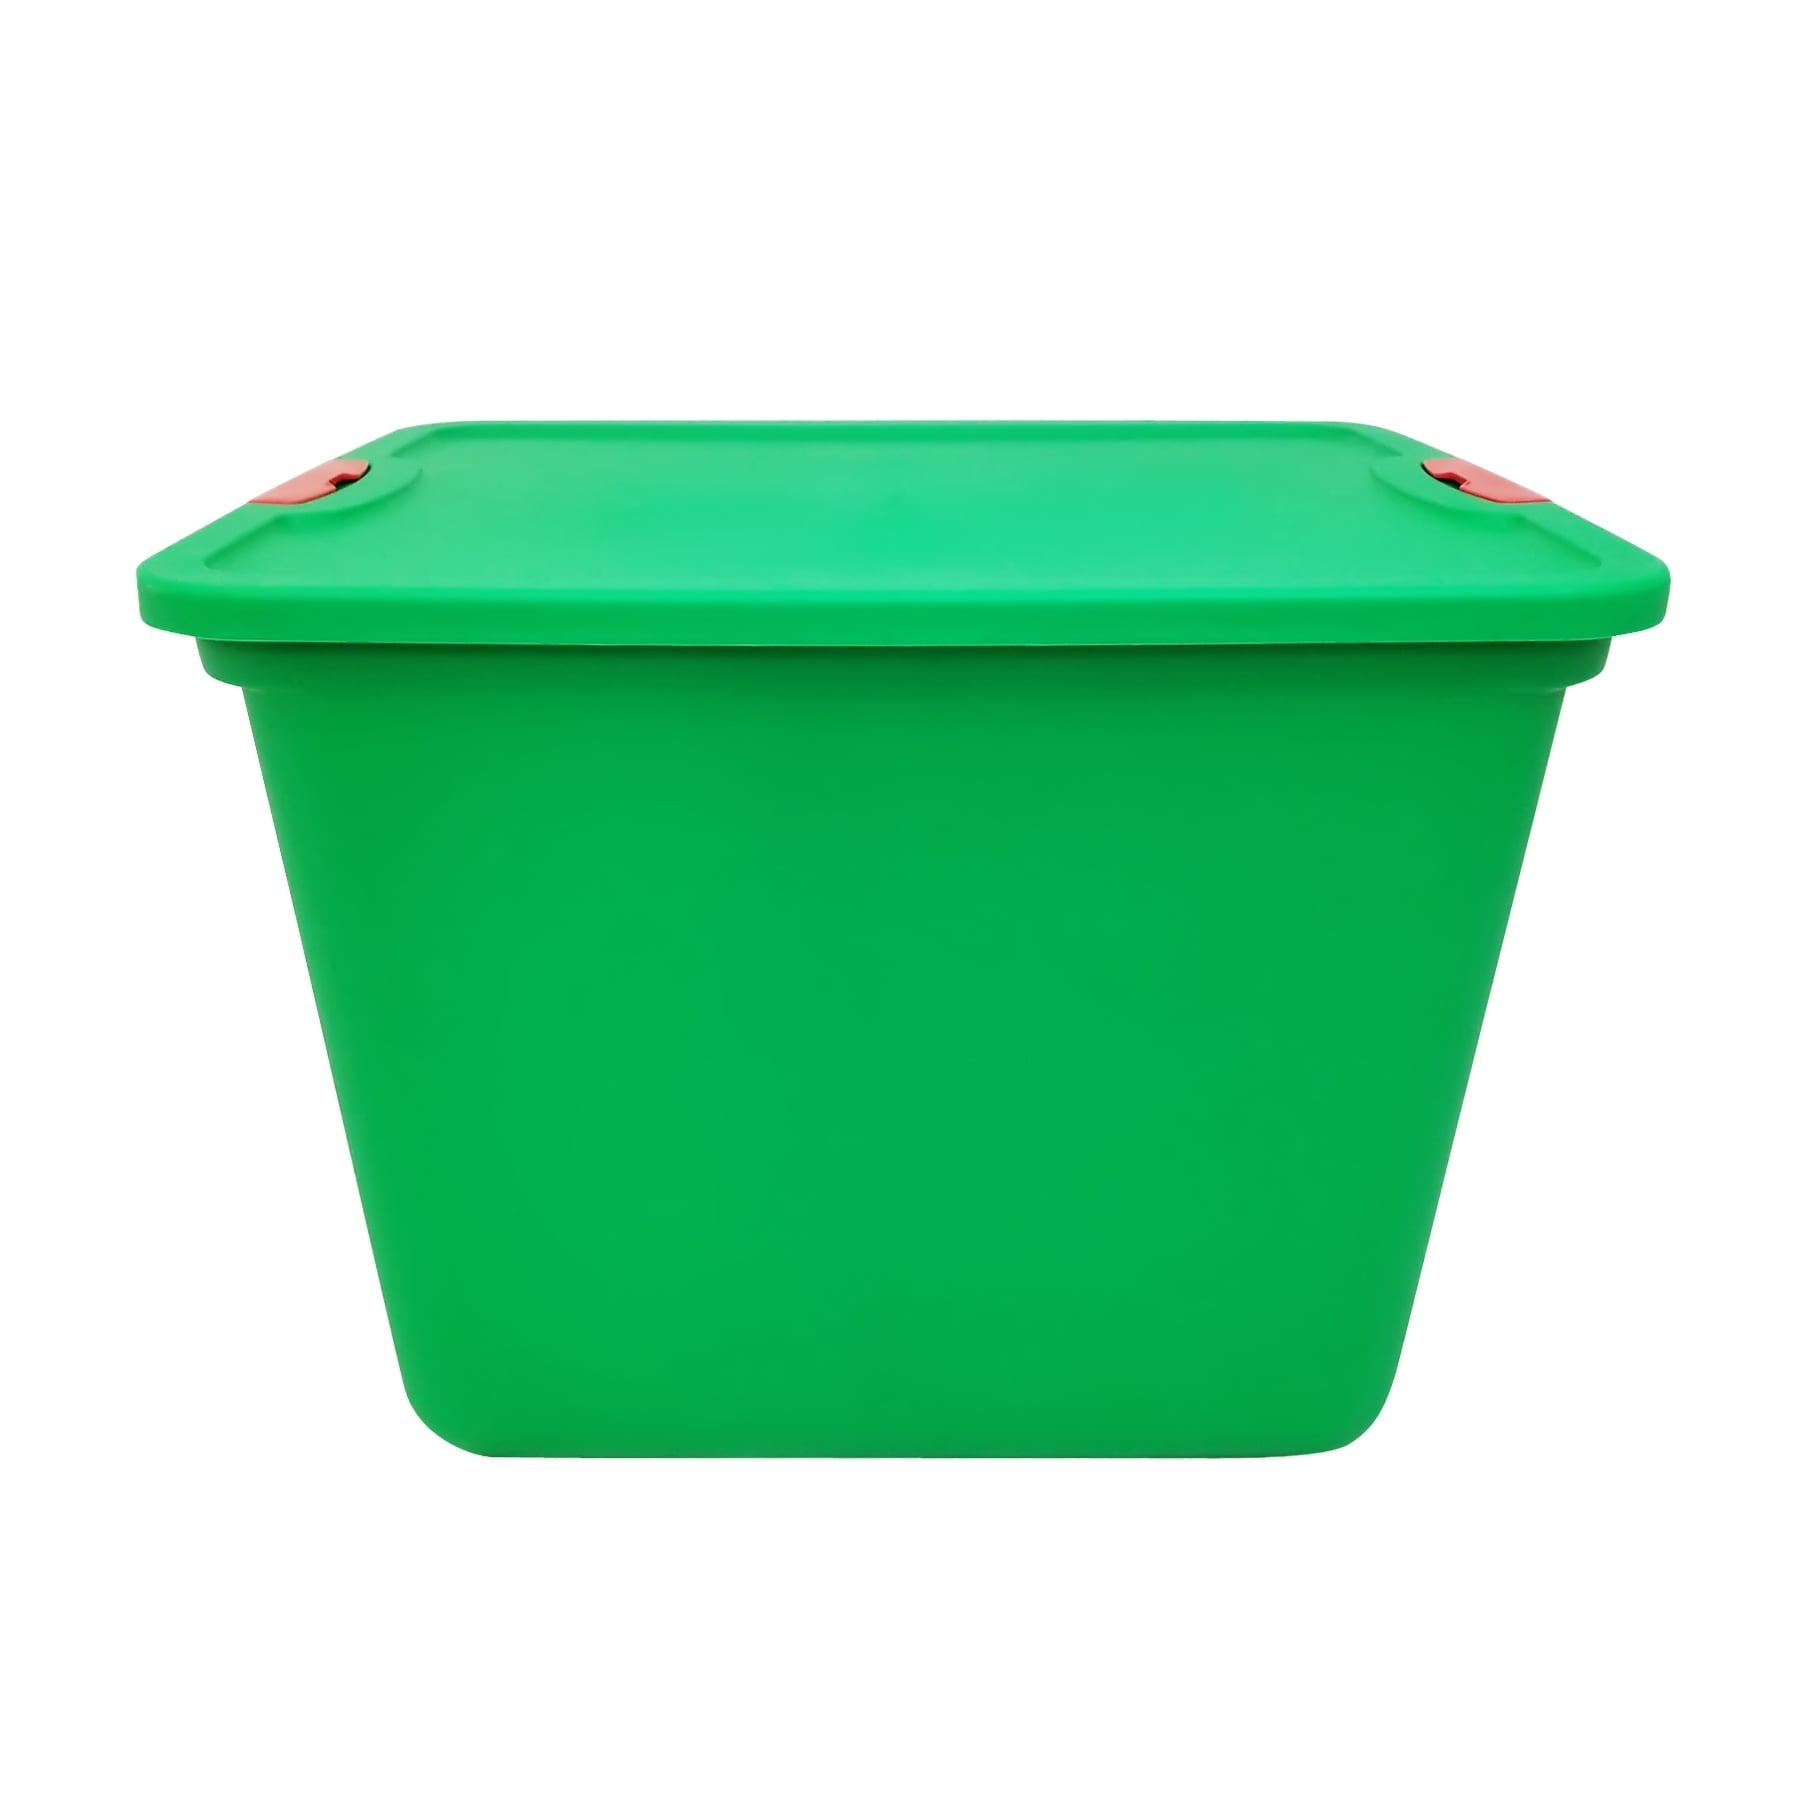 Mainstays 20 Gallon Green Storage Container, Red Latches, Set of 2